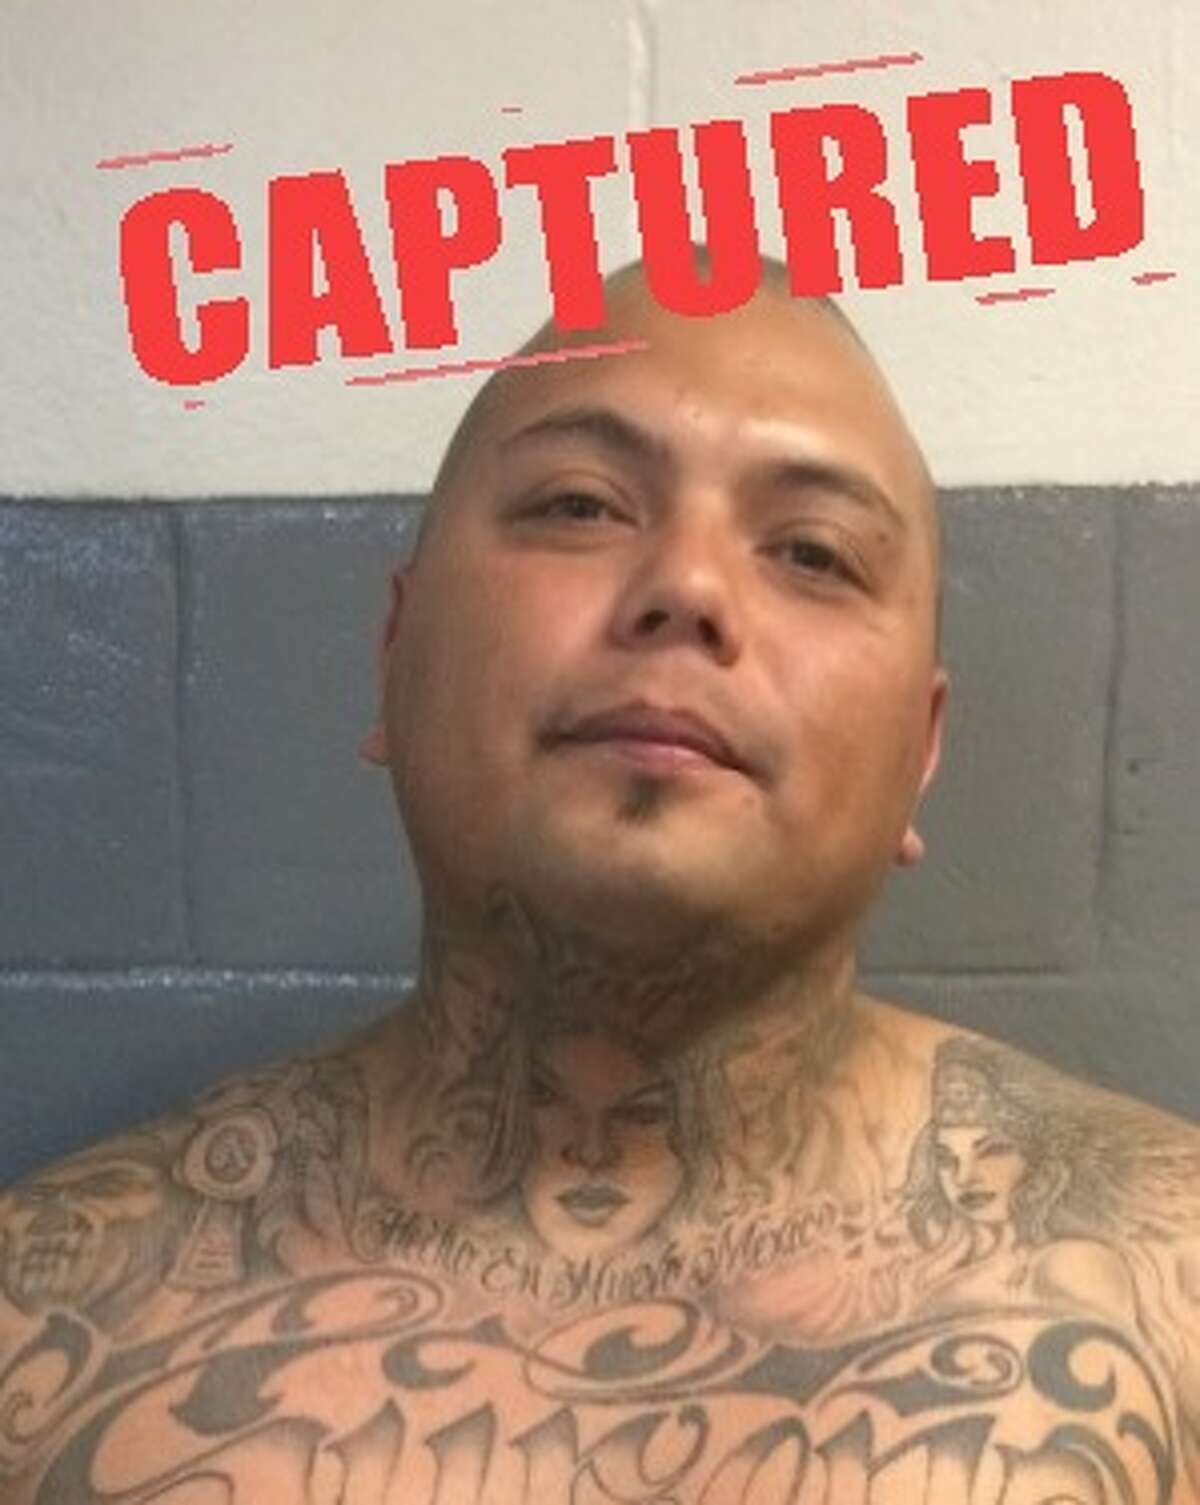 Latin Kings Gang Member Lands On The Texas 10 Most Wanted Fugitives